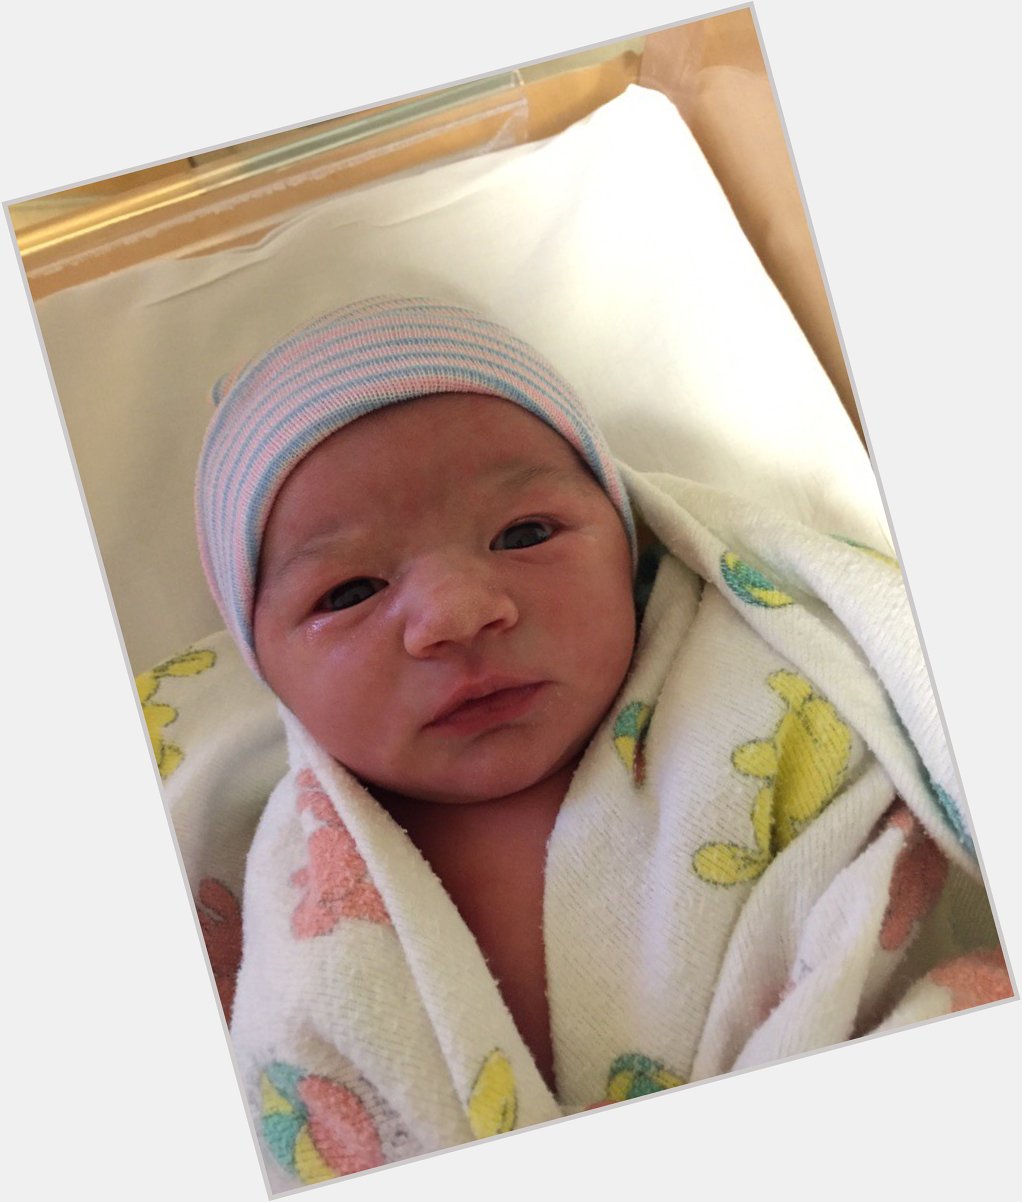 Harper Ana Alvarez has made her presence today weighing 8lbs 4oz and length of 19 1/2 Happy birthday Harper! 